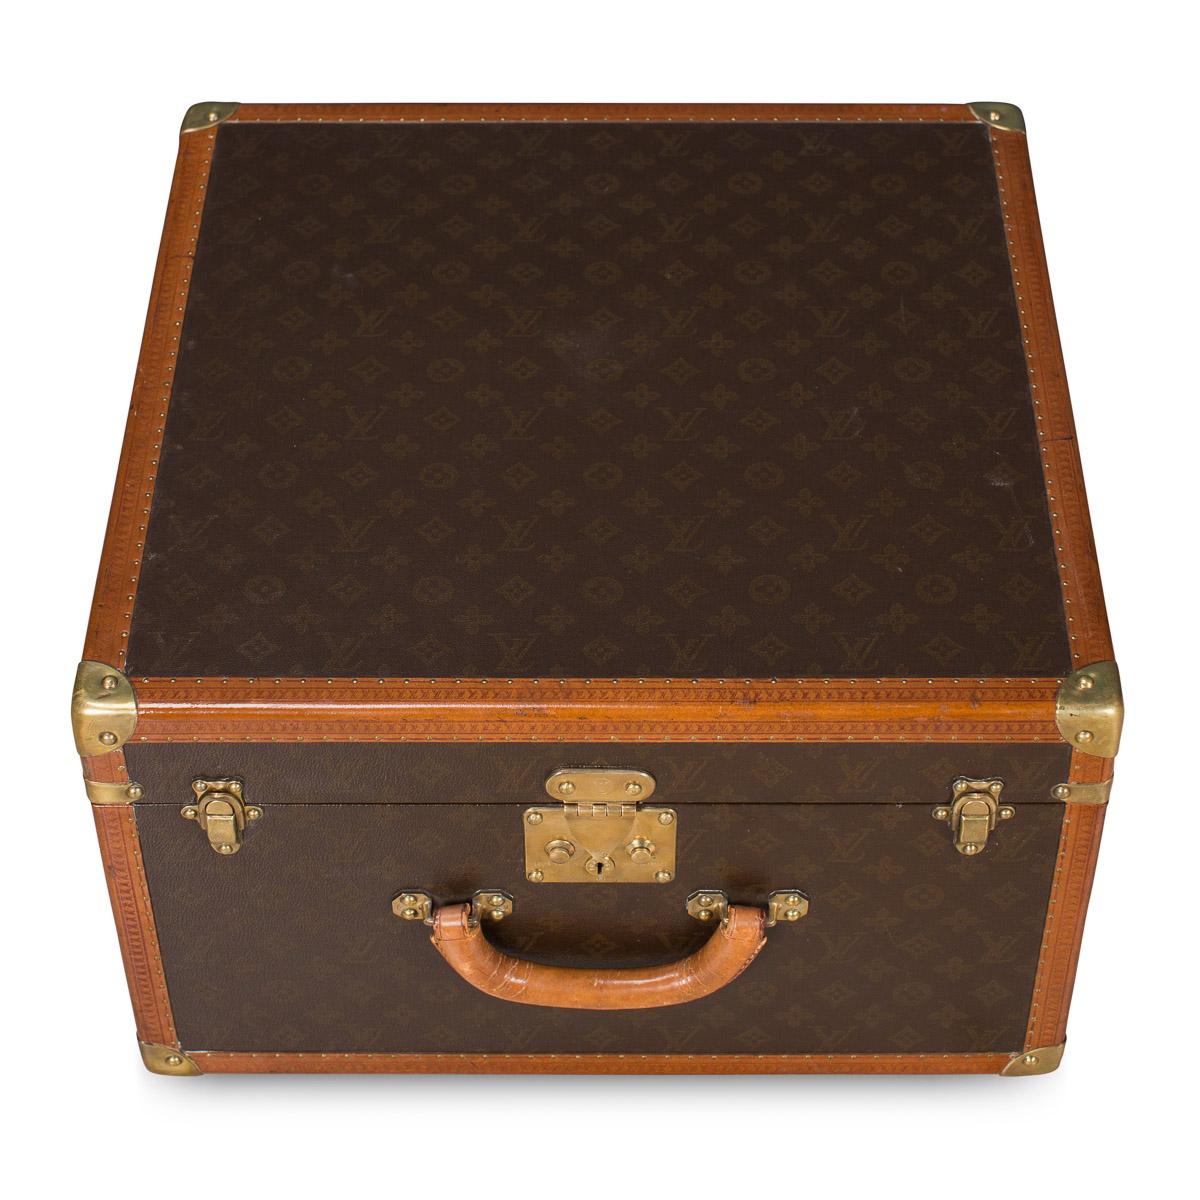 A charming Louis Vuitton cubed hat case, second half of the 20th century with original key and insert tray. The exterior finished in the famous monogram canvas with brass fittings, a great piece for use today or as an item for the